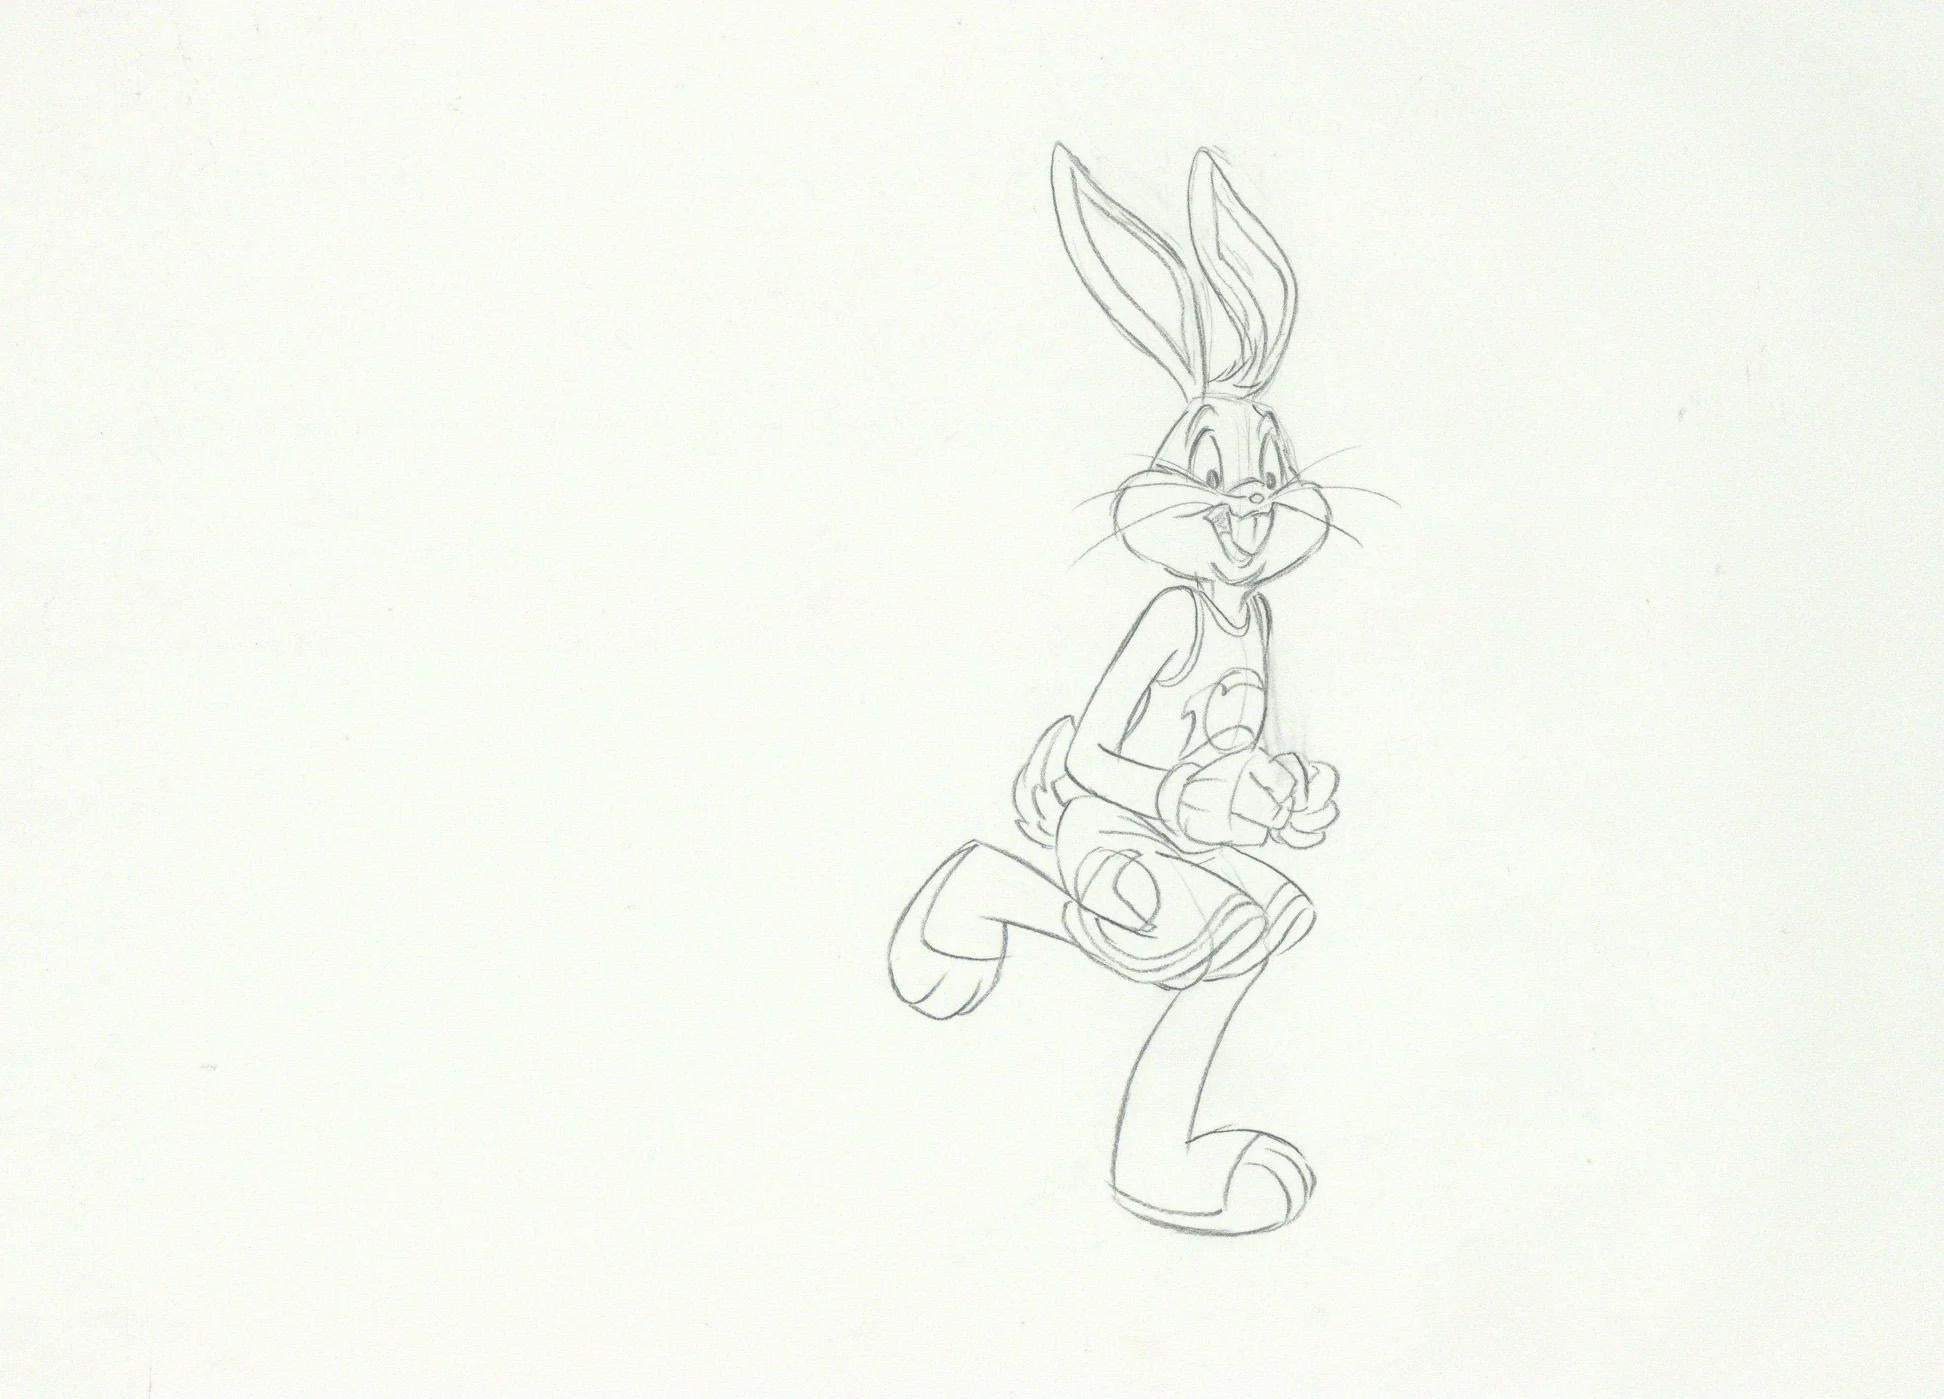 Space Jam Original Production Drawing: Bugs Bunny - Art by Looney Tunes Studio Artists